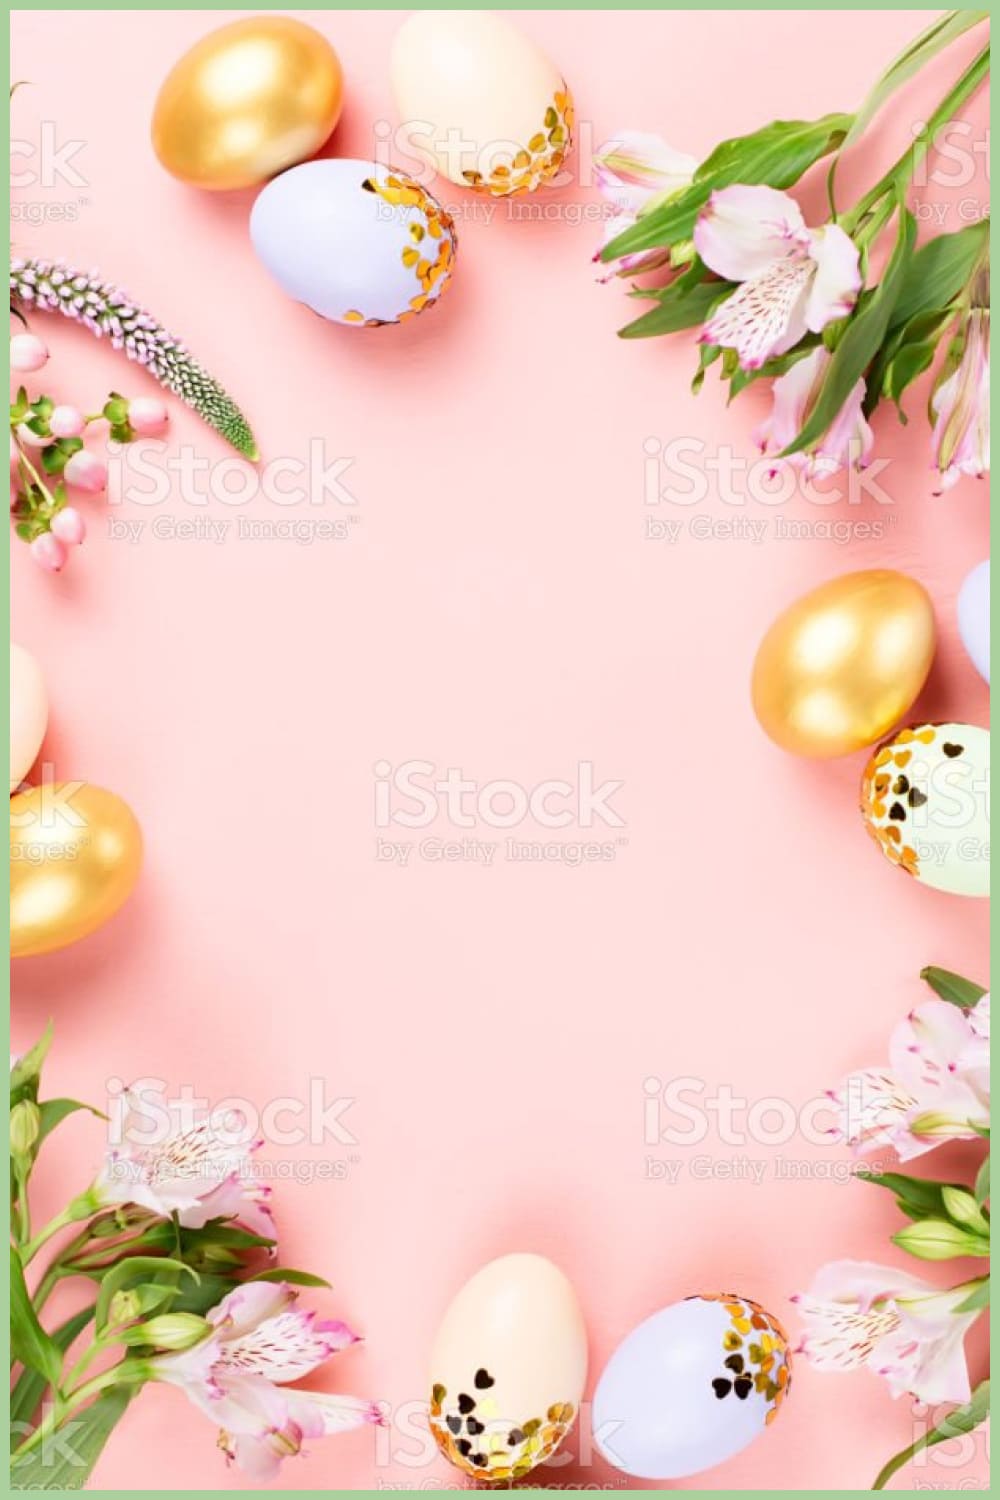 Festive Happy Easter background with decorated eggs, flowers, candy and ribbons in pastel colors on pink.